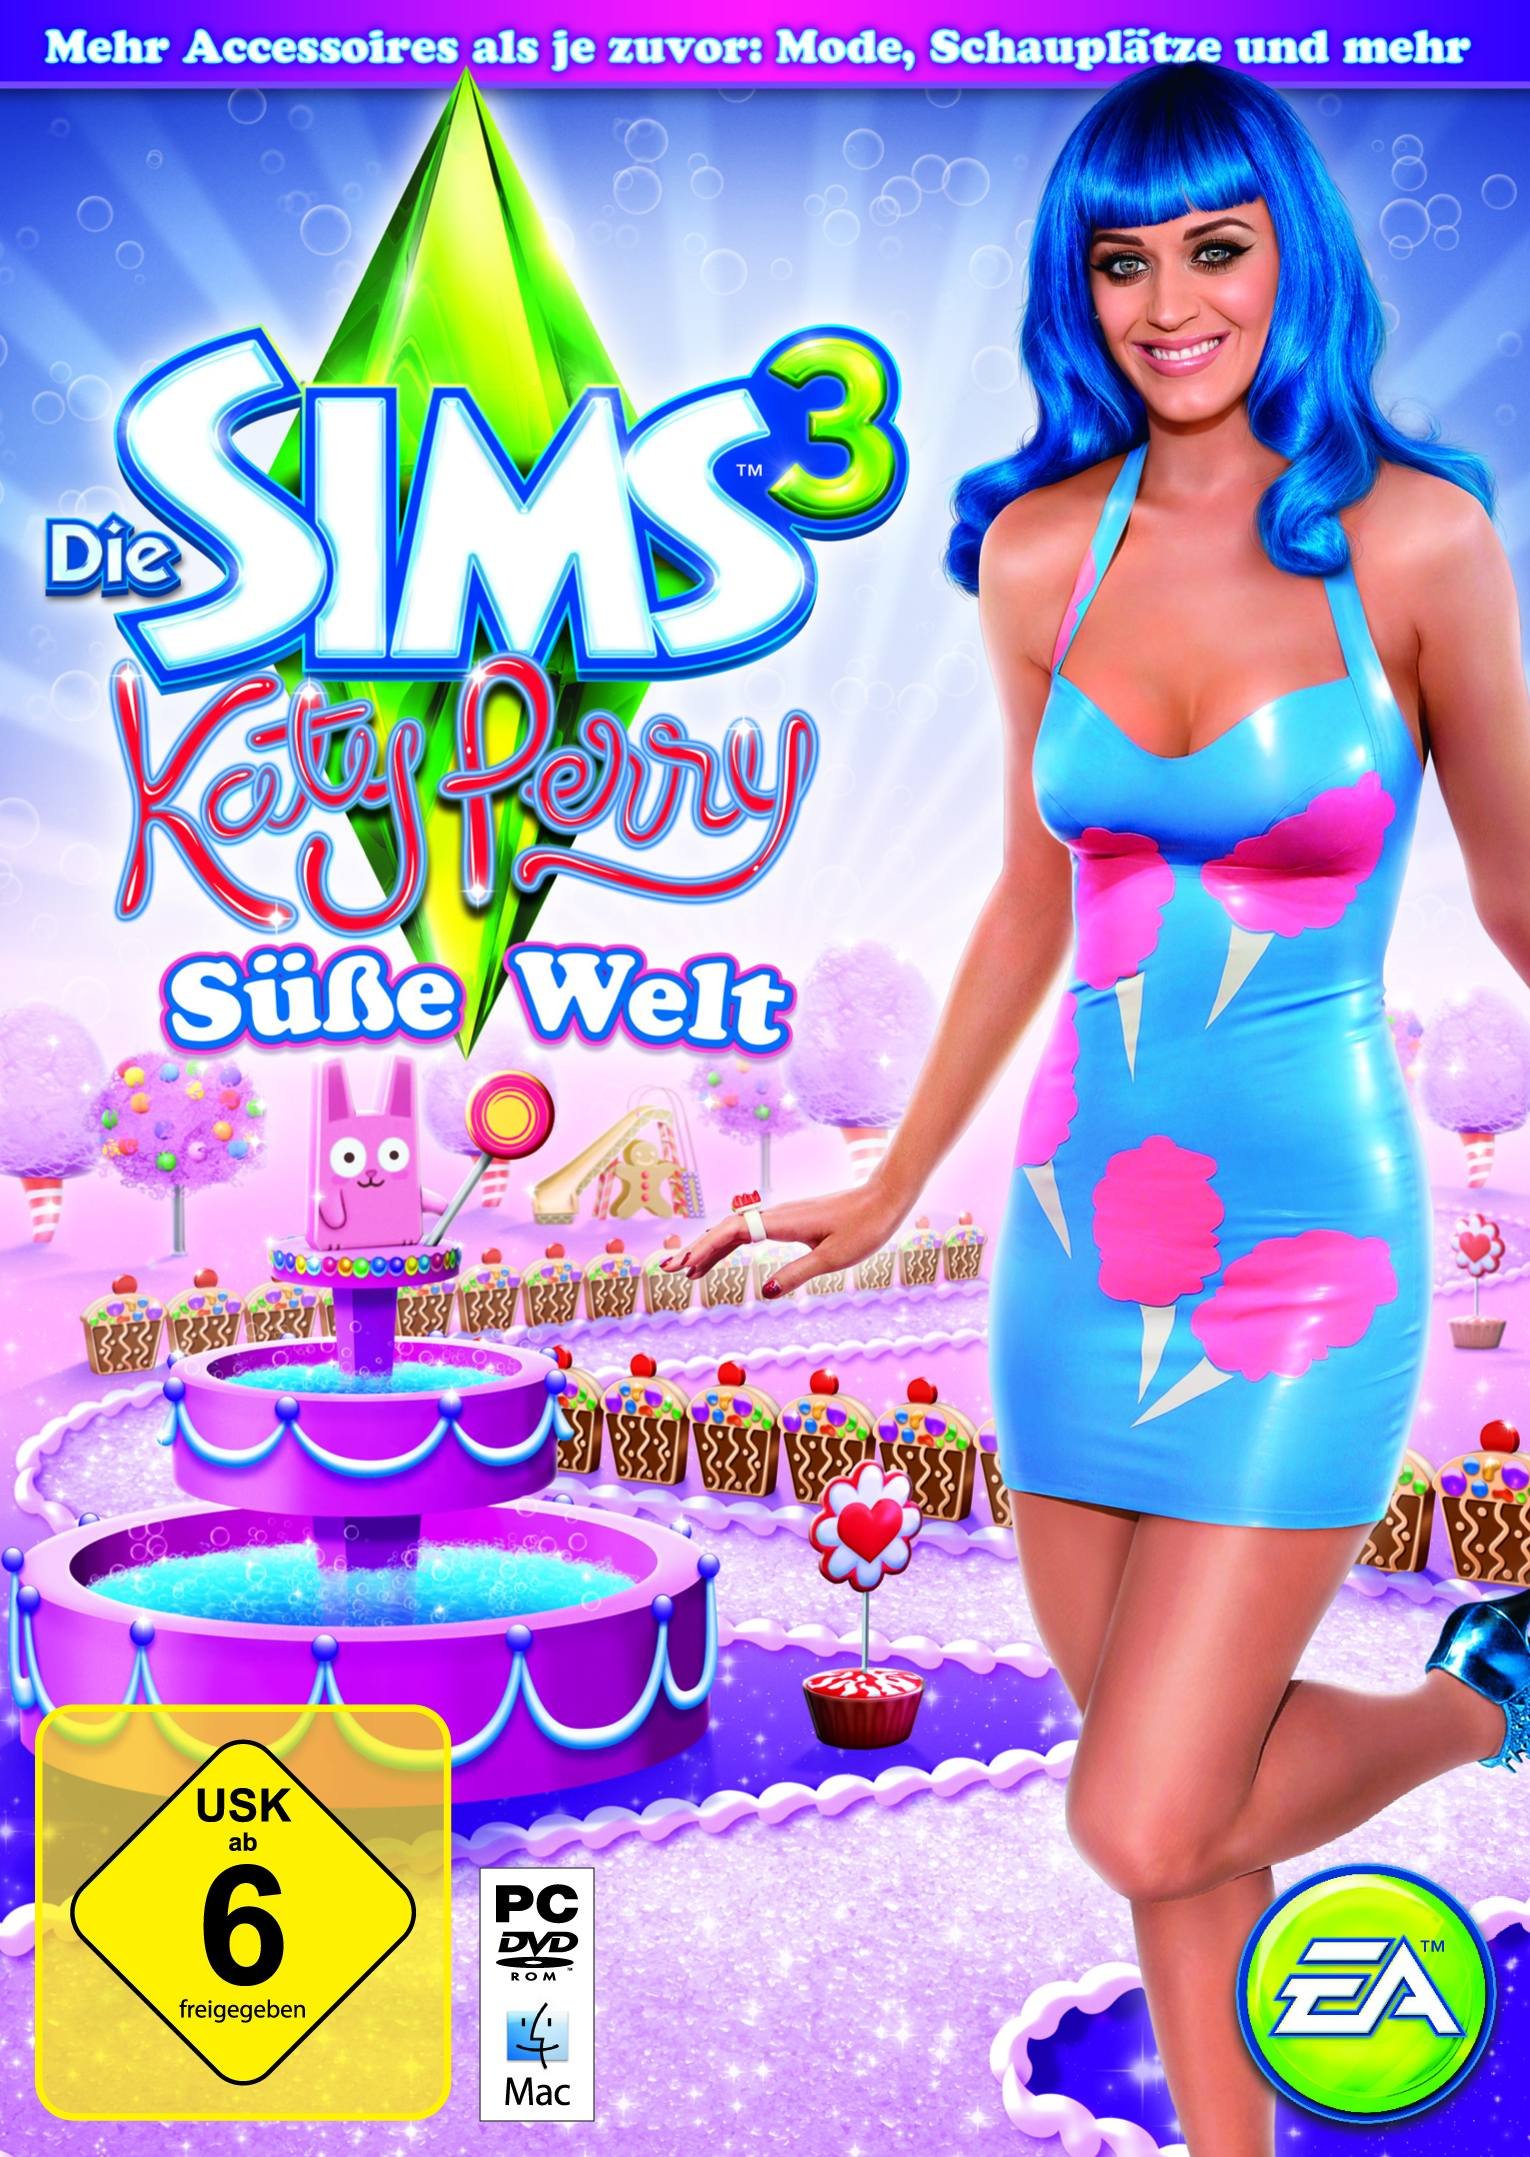 Die-Sims-3-Katy-Perry-Se-Welt-Accessoires-Add-On